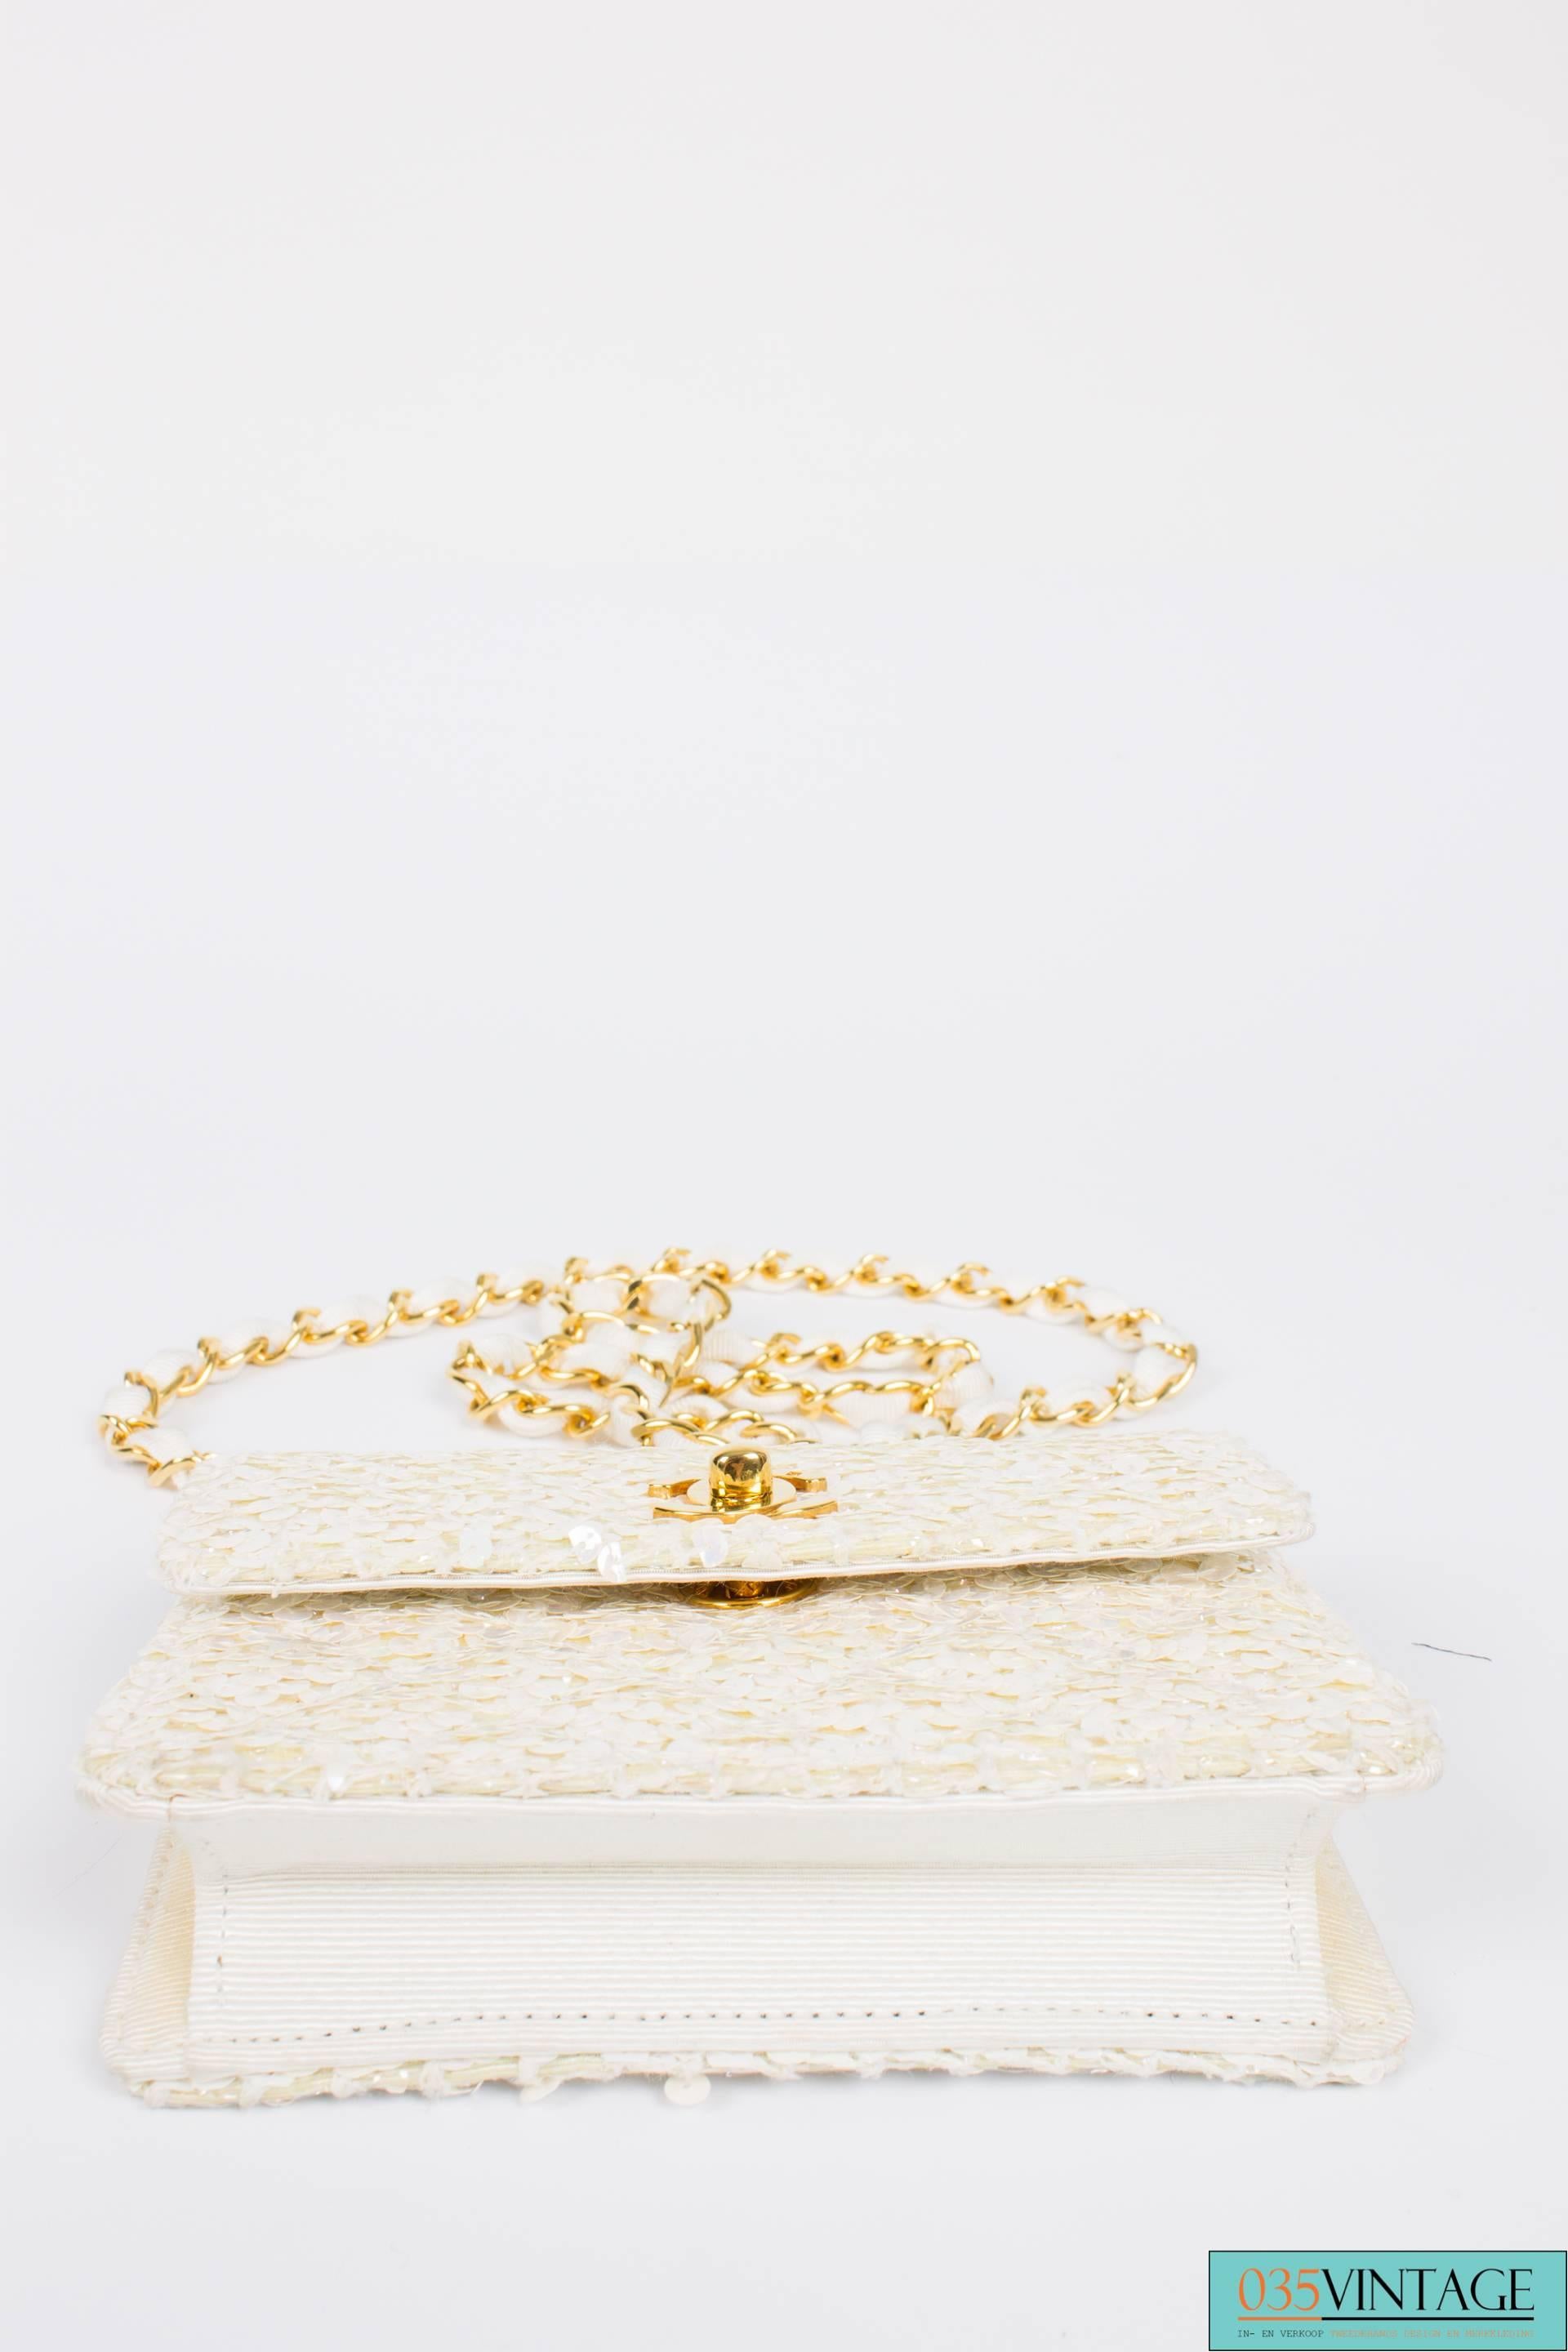 Chanel Iridescent Micro Flap Bag - ivory/sequins/gold 2